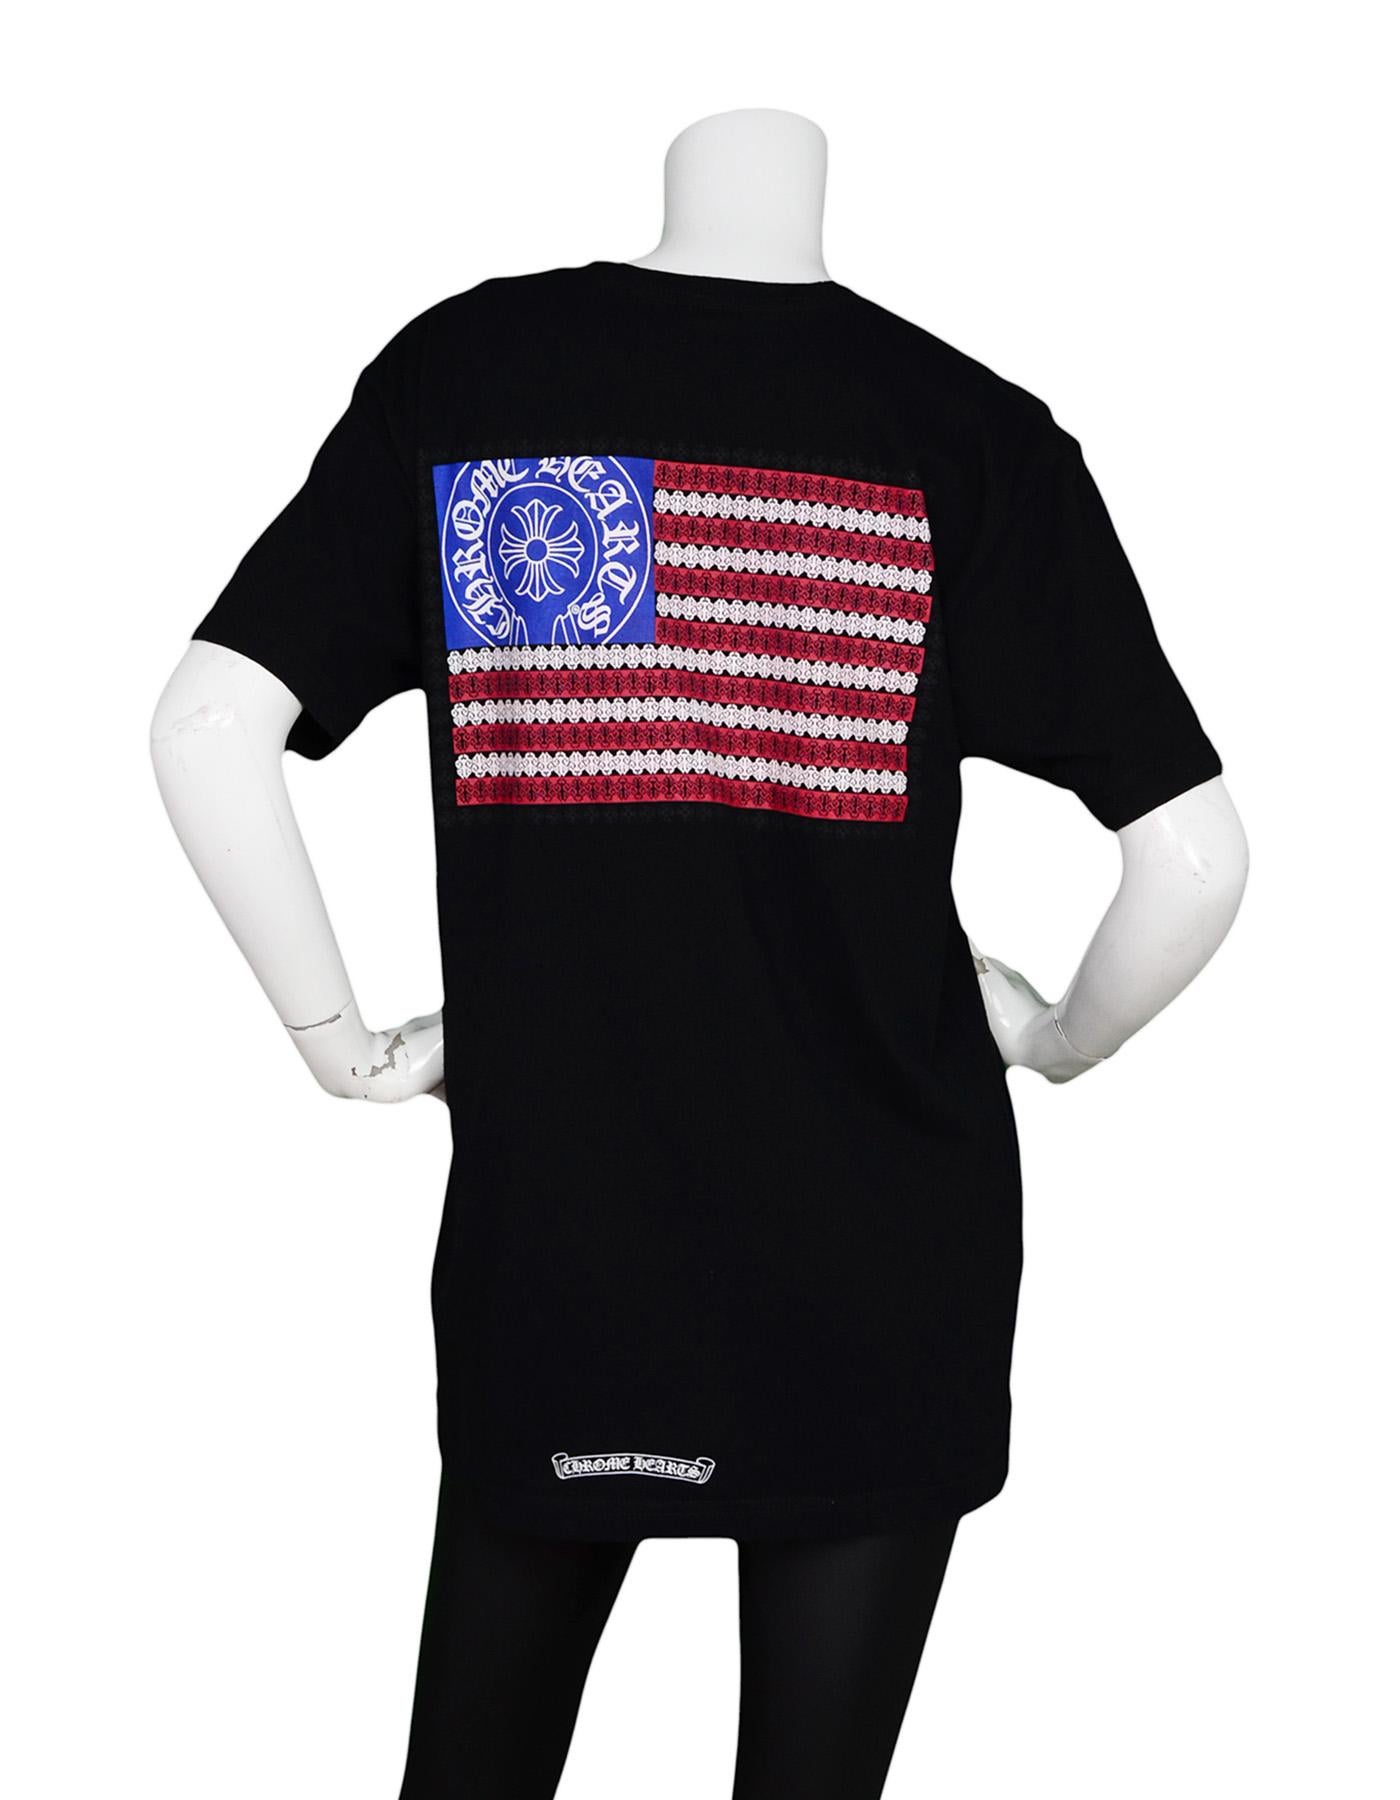 Chrome Hearts Men's Black Flag American Flag Cotton Pocket Short Sleeve T-Shirt Top, sz Large

Made In: USA
Color: Black, blue, red, white
Materials: 100% Cotton
Overall Condition: Excellent pre-owned condition 
Measurements: 
Shoulder To Shoulder: